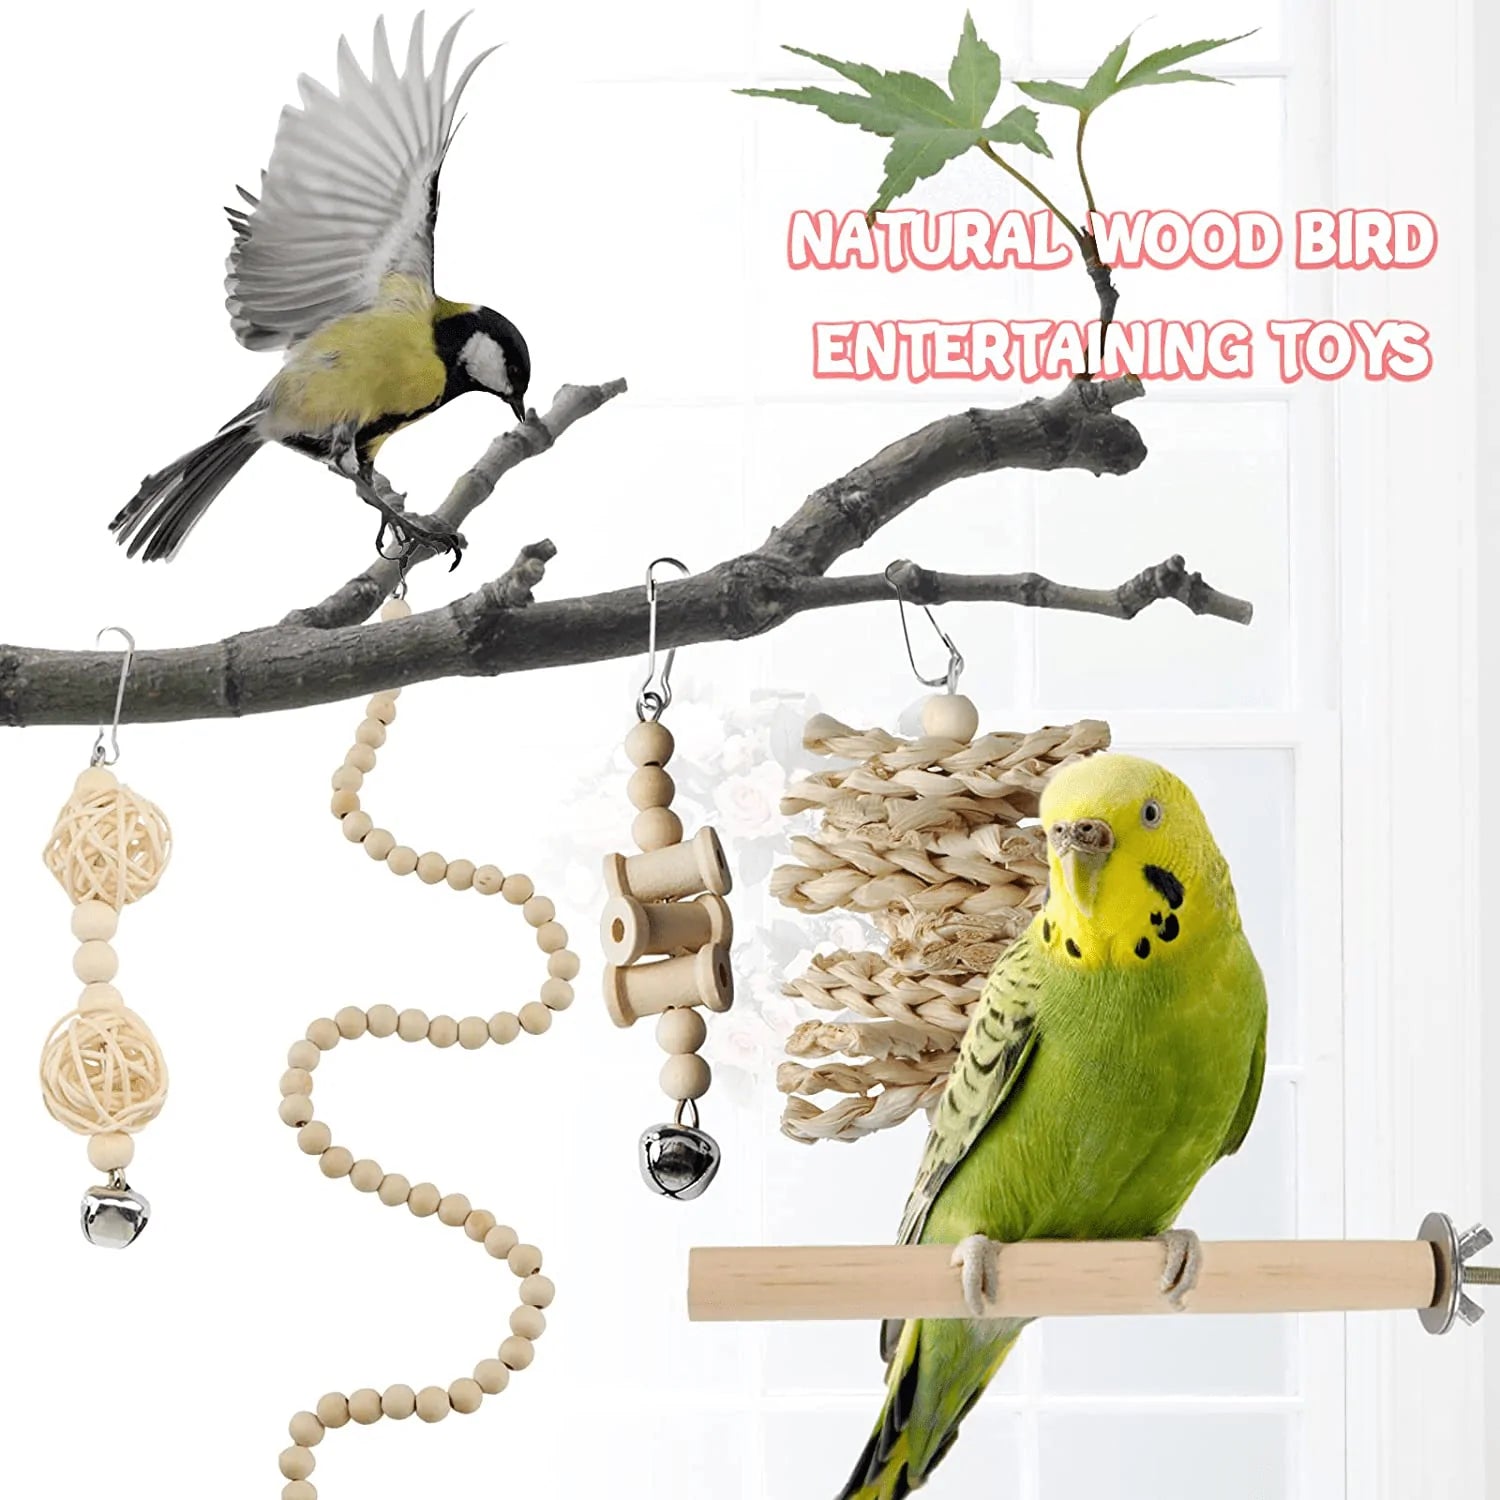 Pietypet Bird Parrot Toys for Cages, Colorful Chewing Hanging Swing Pet Bird Toy with Bells, Wooden Ladder Hammock, Rope Perch, Birdcage Stands for Parakeets Cockatiels, Conures, Macaw, Parrot